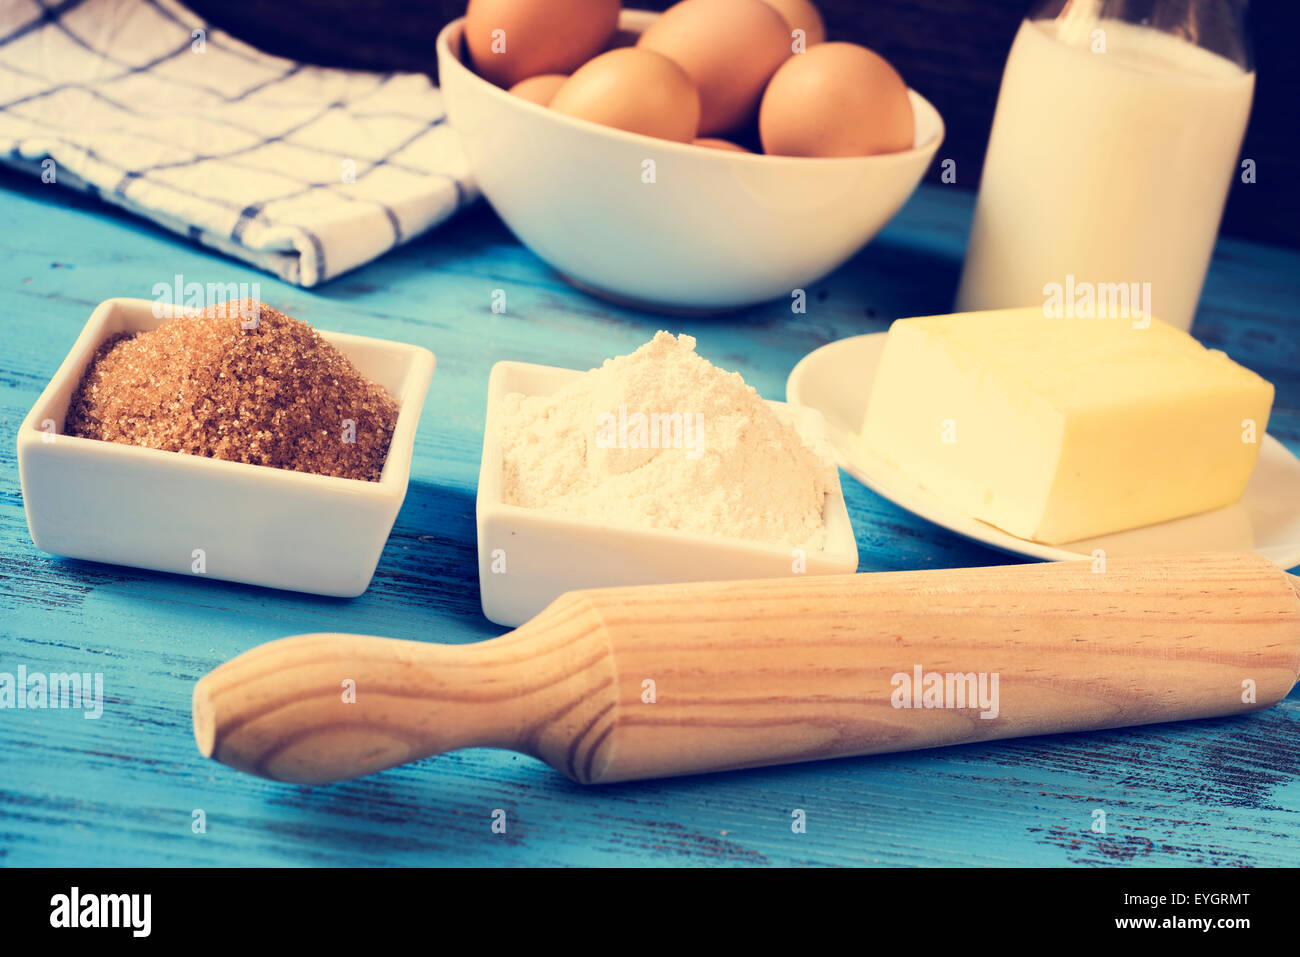 some ingredients for preparing cookies or a cake, such as milk, eggs, flour, butter and brown sugar on a blue rustic wooden surf Stock Photo